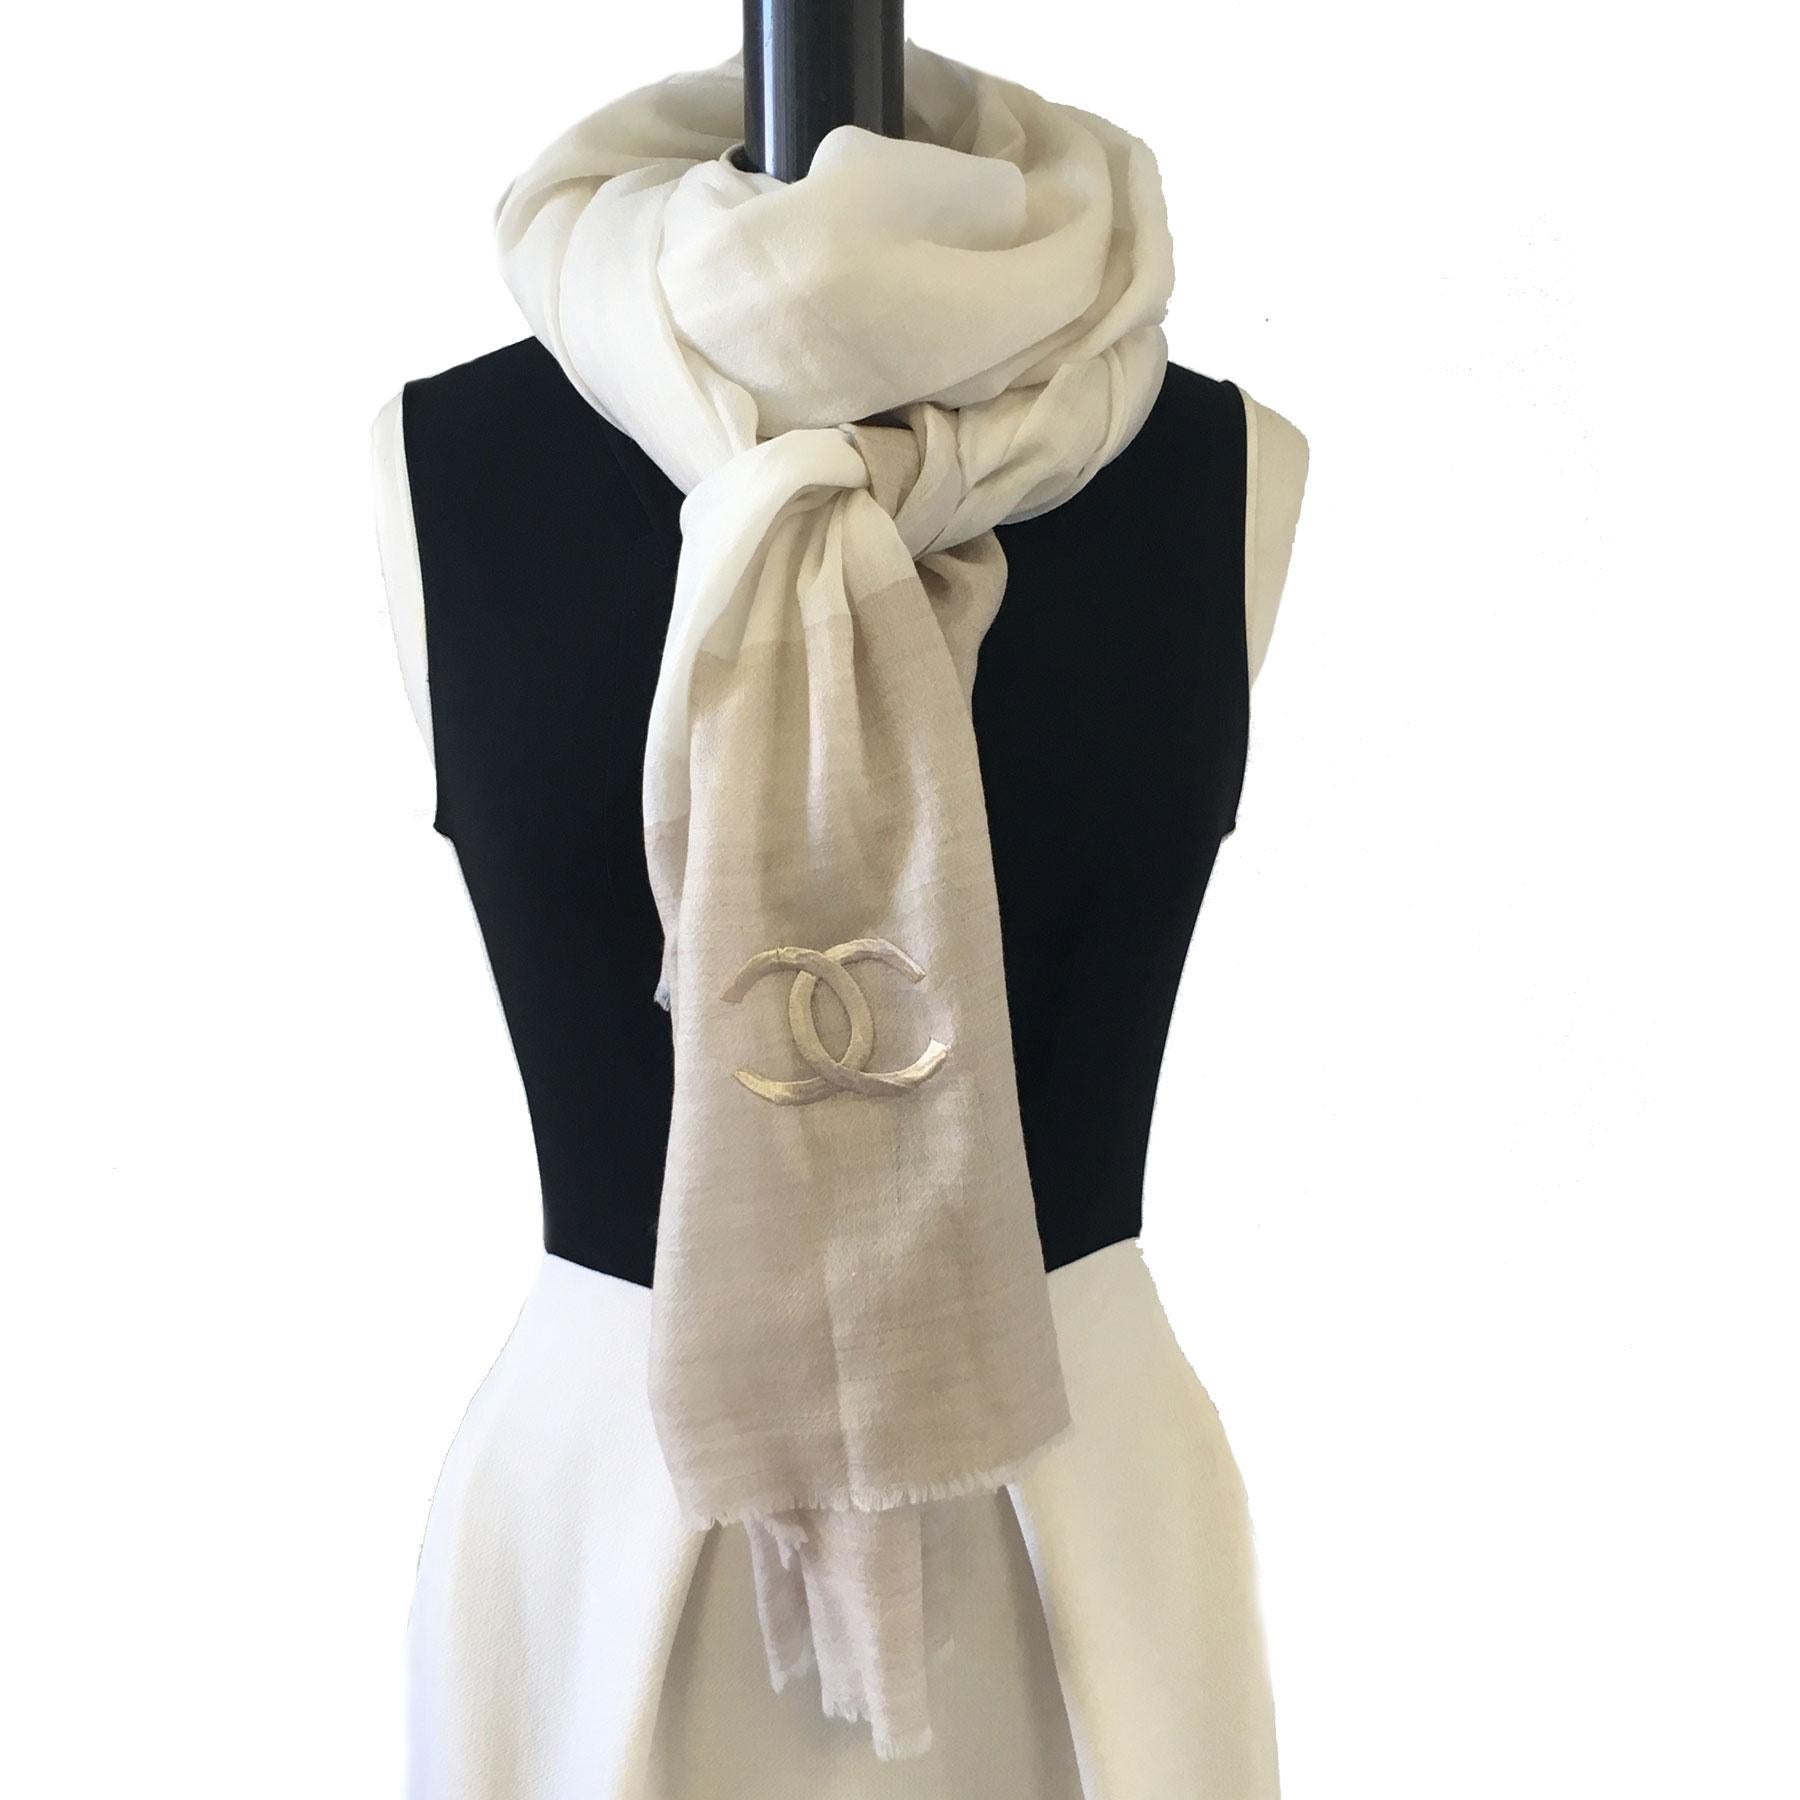 Beautiful Chanel shawl in ecru and dark beige cashmere. Ends with small fringes.

An embroidered CC is on the bottom of the scarf.

In perfect condition. Made in Italy

Dimensions: 230x80 cm

Will be delivered in a new, non-original dust bag